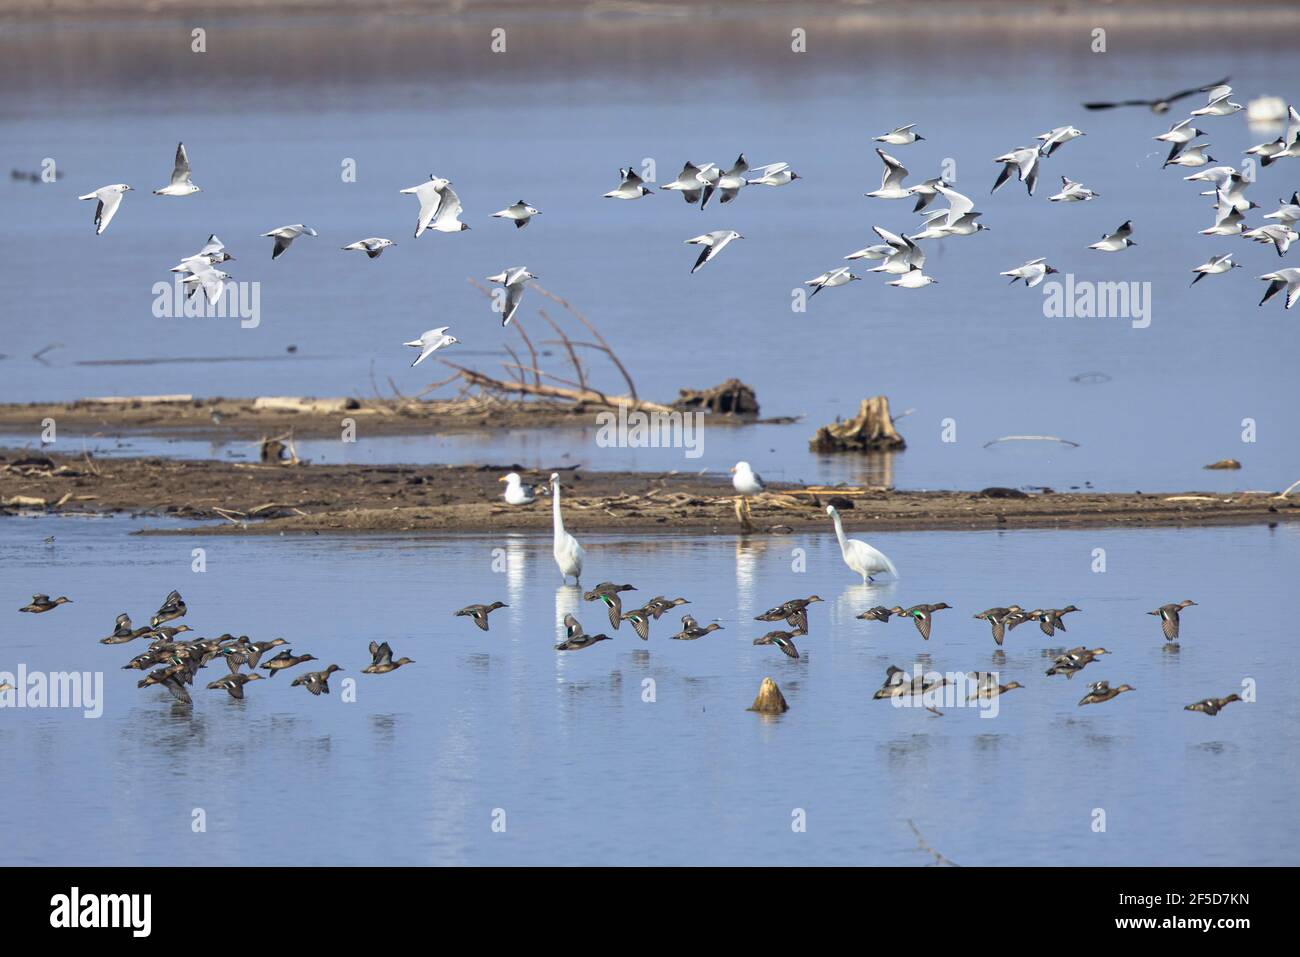 green-winged teal (Anas crecca), flying flock with many black-headed gulls, Germany, Bavaria, Lake Chiemsee Stock Photo